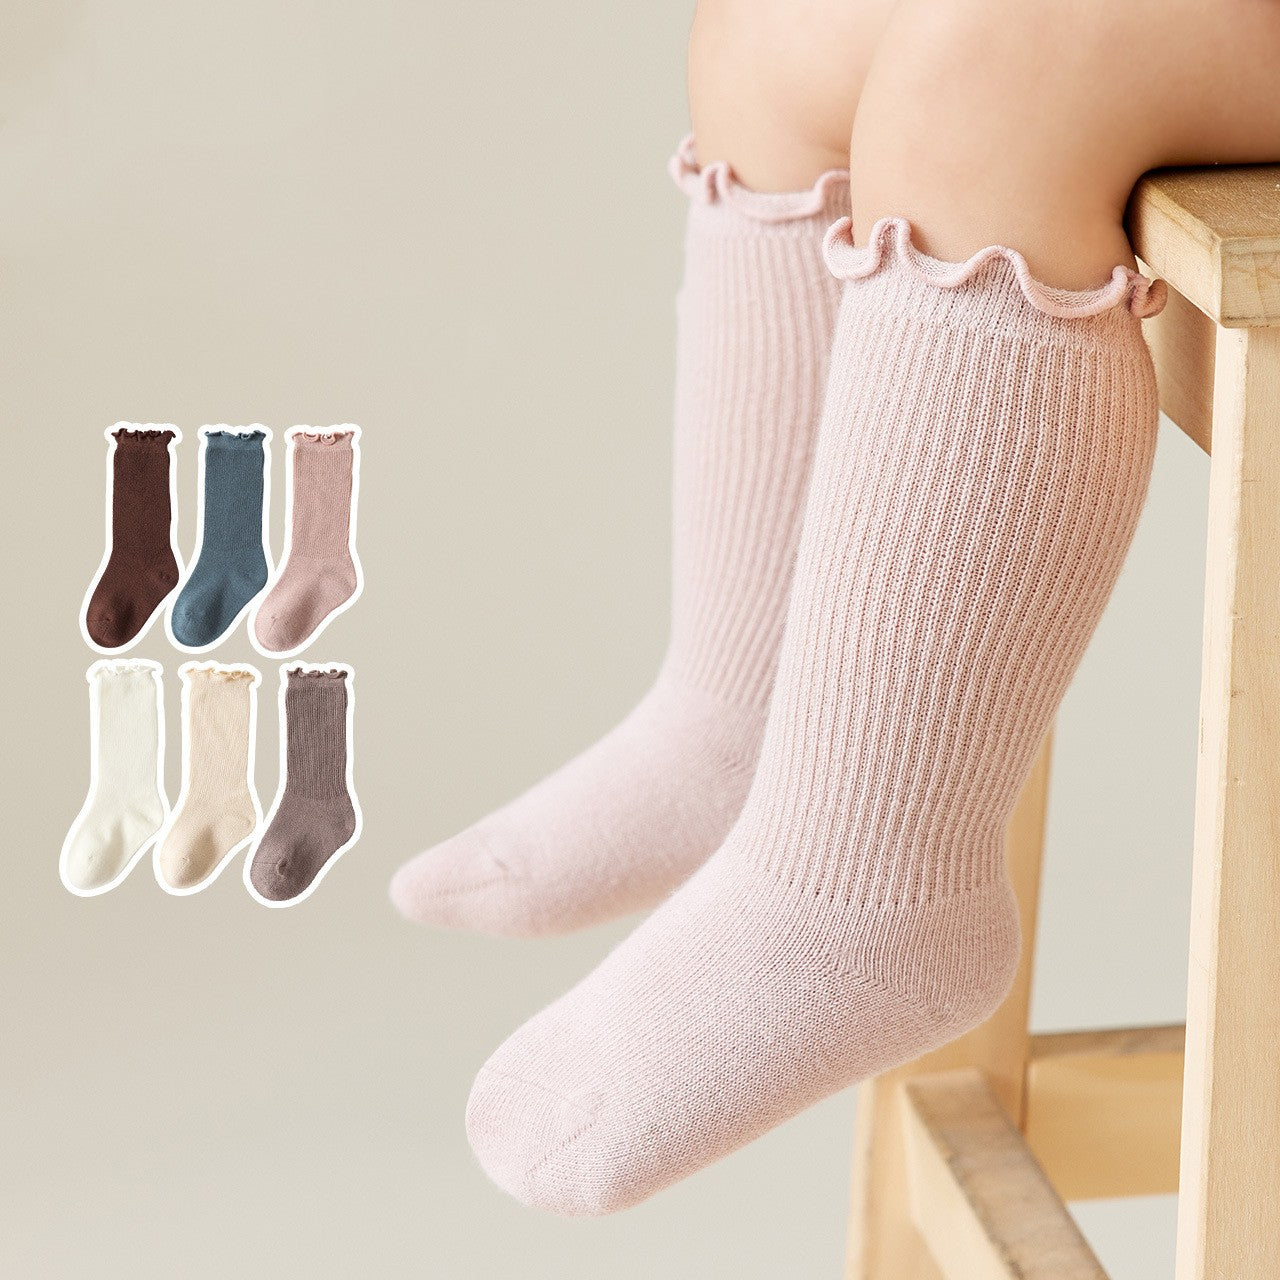 Girl's Thin Knee Length Socks  - Different colors available